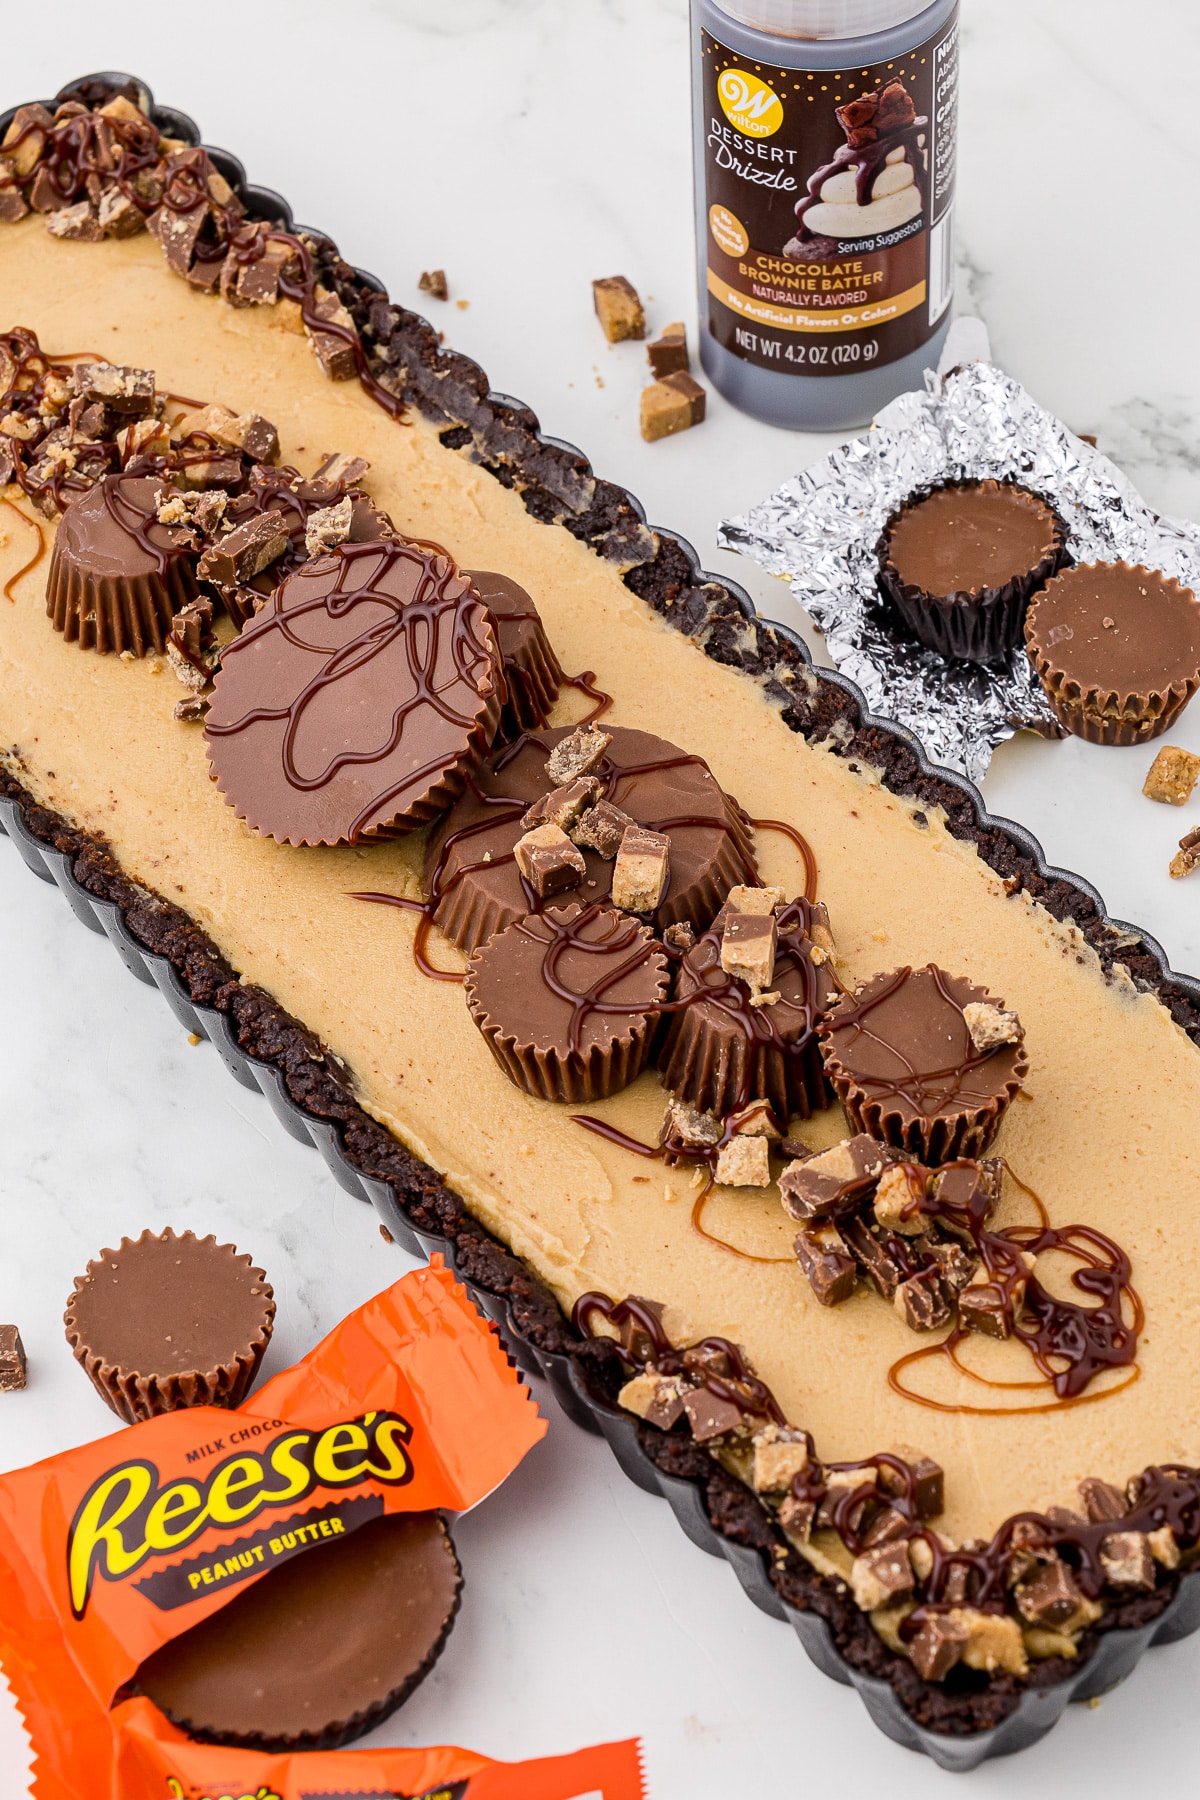 No bake peanut butter tart in a tart pan with wilton drizzle and reese's peanut butter cups